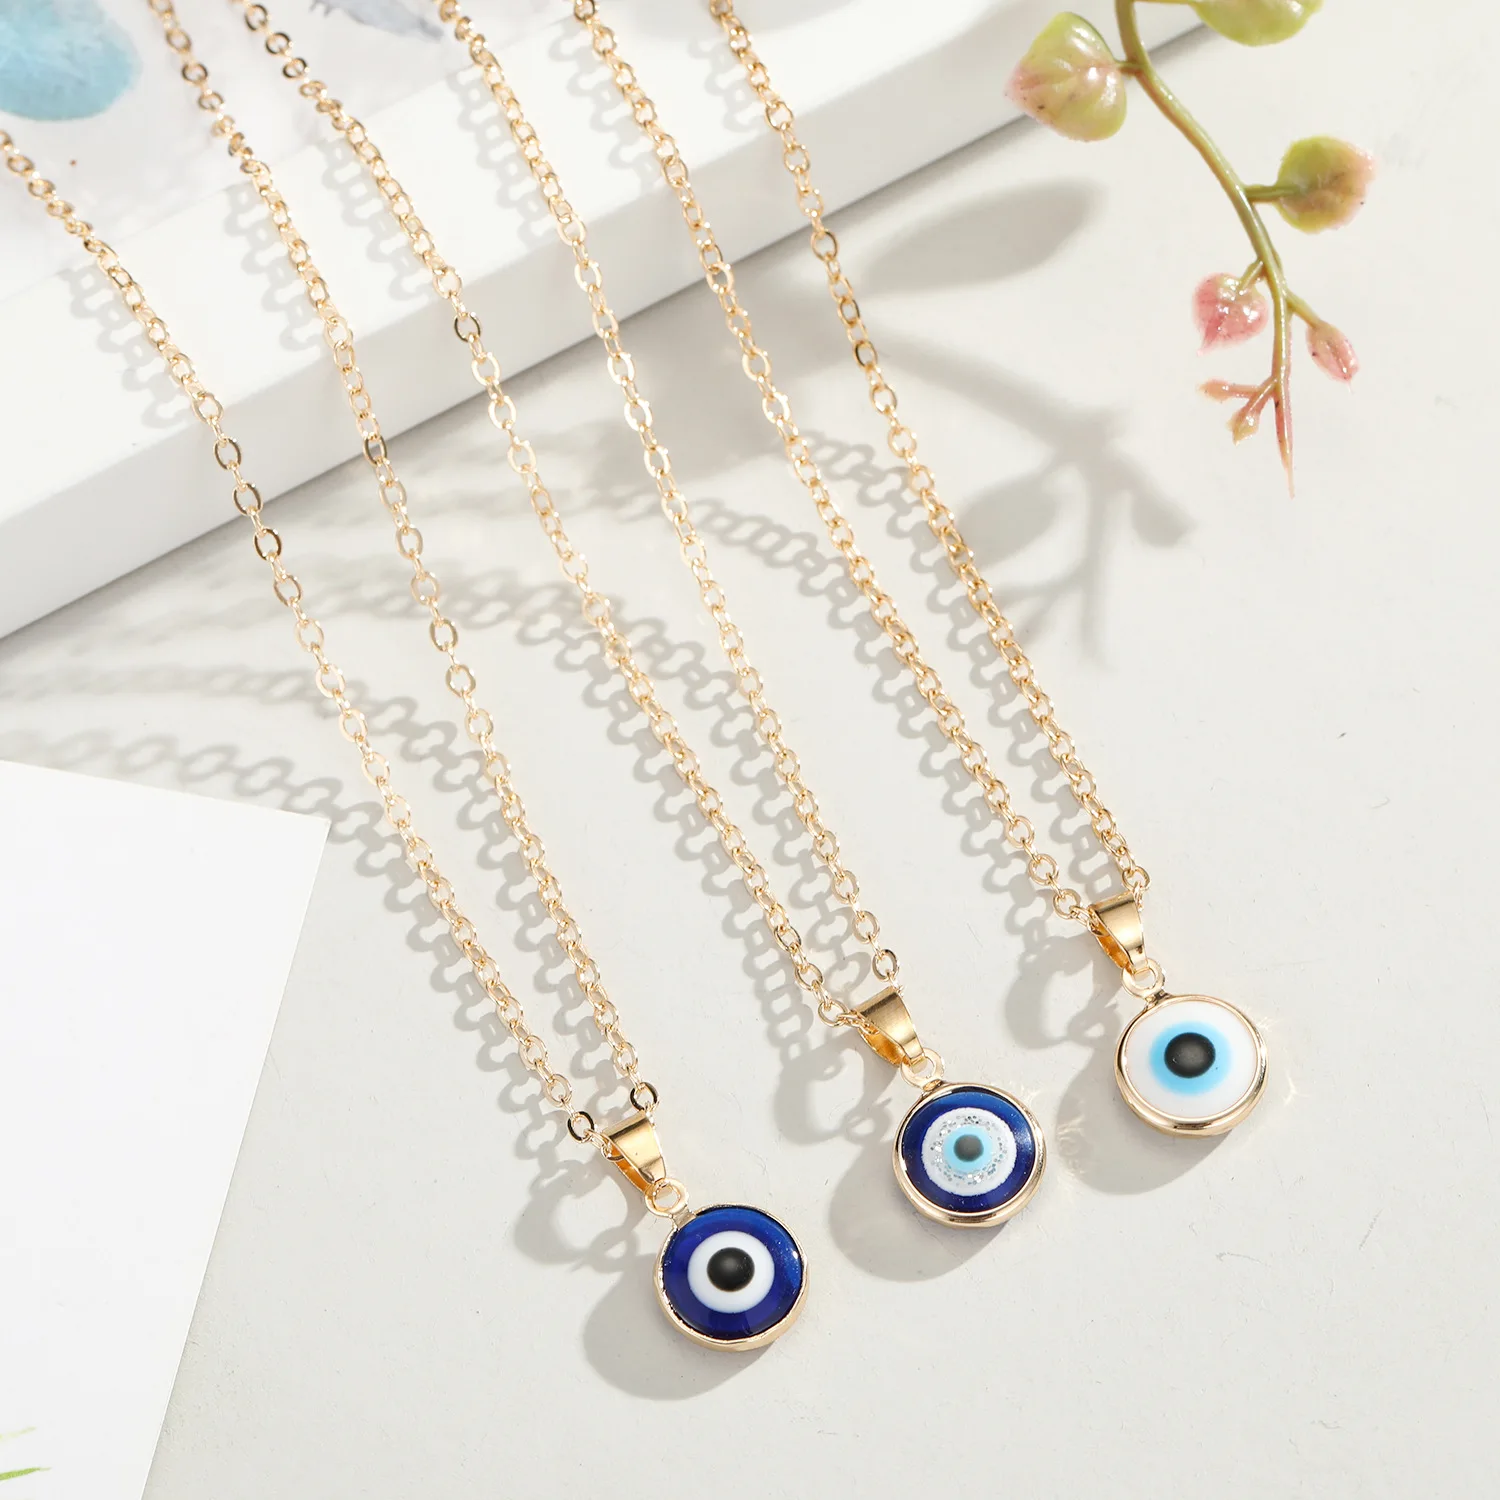 

European Hot Selling Gold Plated Blue Evil Eyes Pendant Necklace Trendy Geometric Round Oil Drop Devil Eyes Necklace